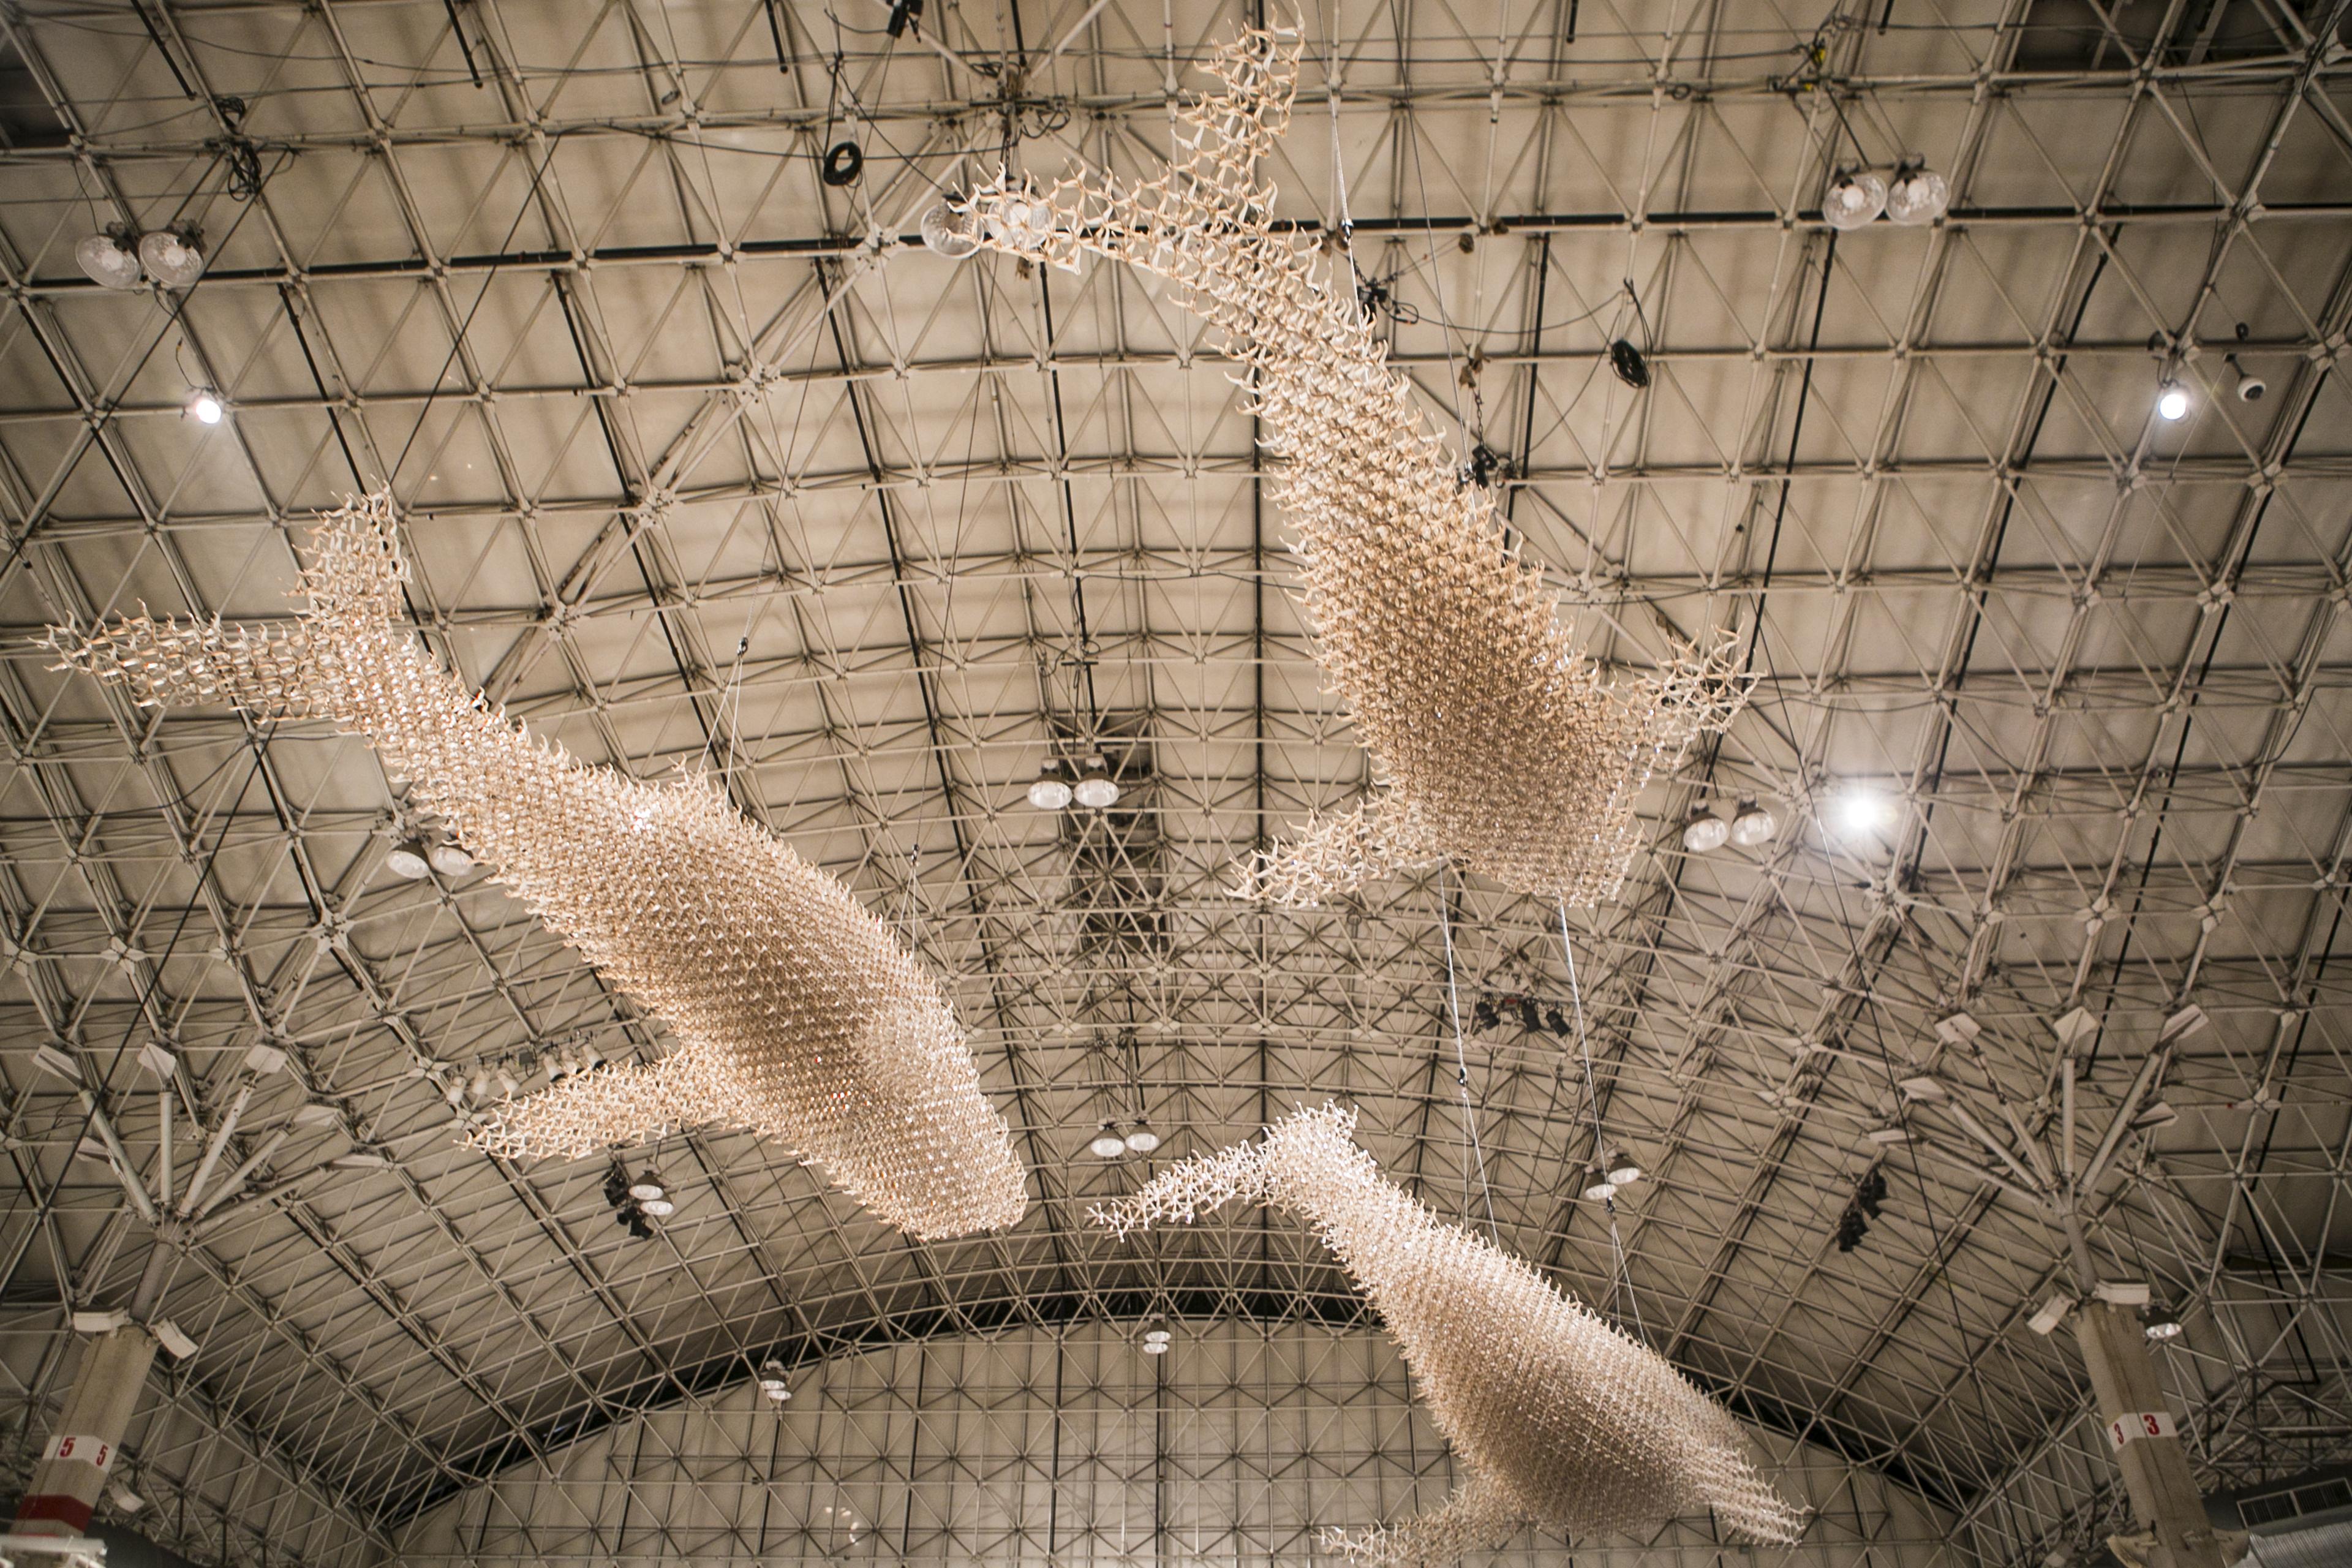 Three whale or giant fish forms, made of light tan colored sticks of some kind, are suspended from the ceiling of a large warehouse space.